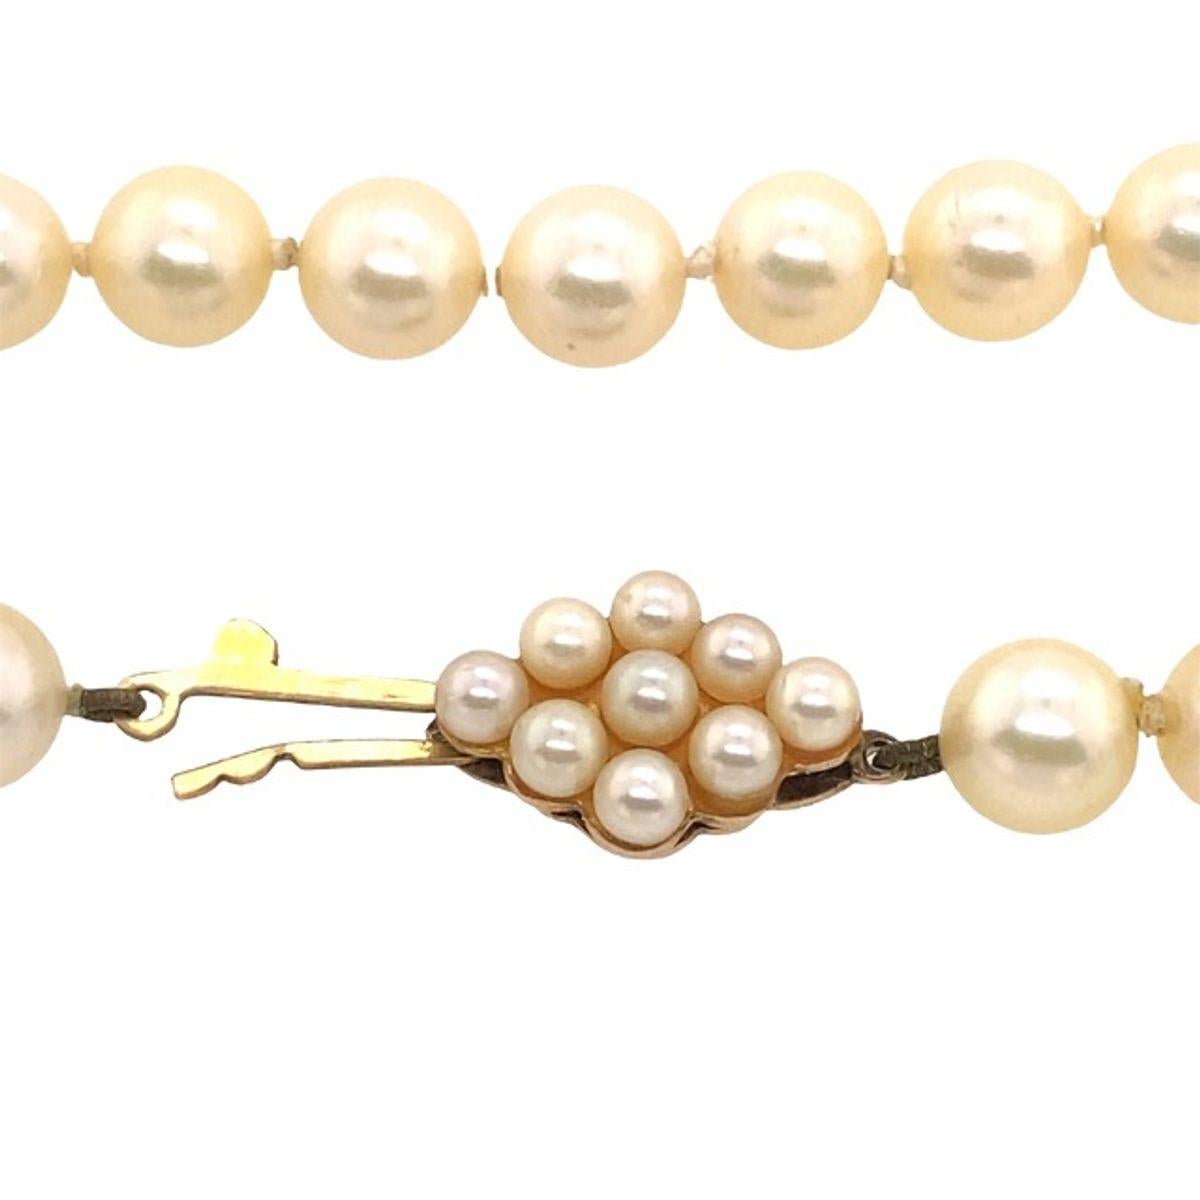 Matching Cultured Pearl Necklace with 9-Cultured Pearl Clasp In Excellent Condition For Sale In London, GB